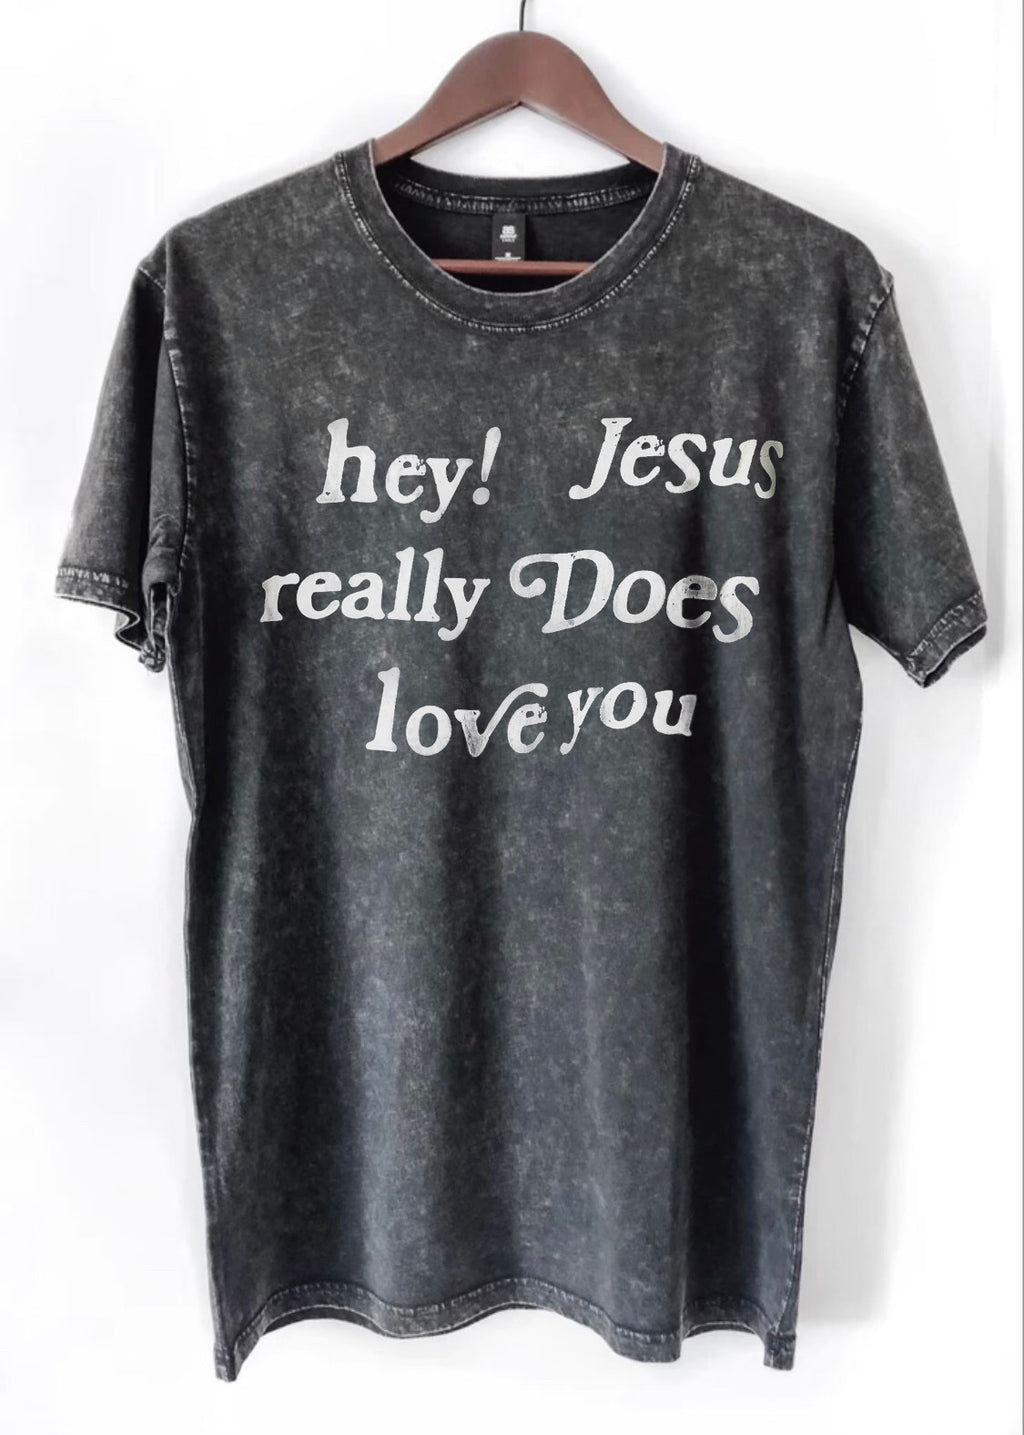 HEY! JESUS REALLY DOES LOVE YOU BLACK MINERAL WASH SLEEVE T-SHIRT